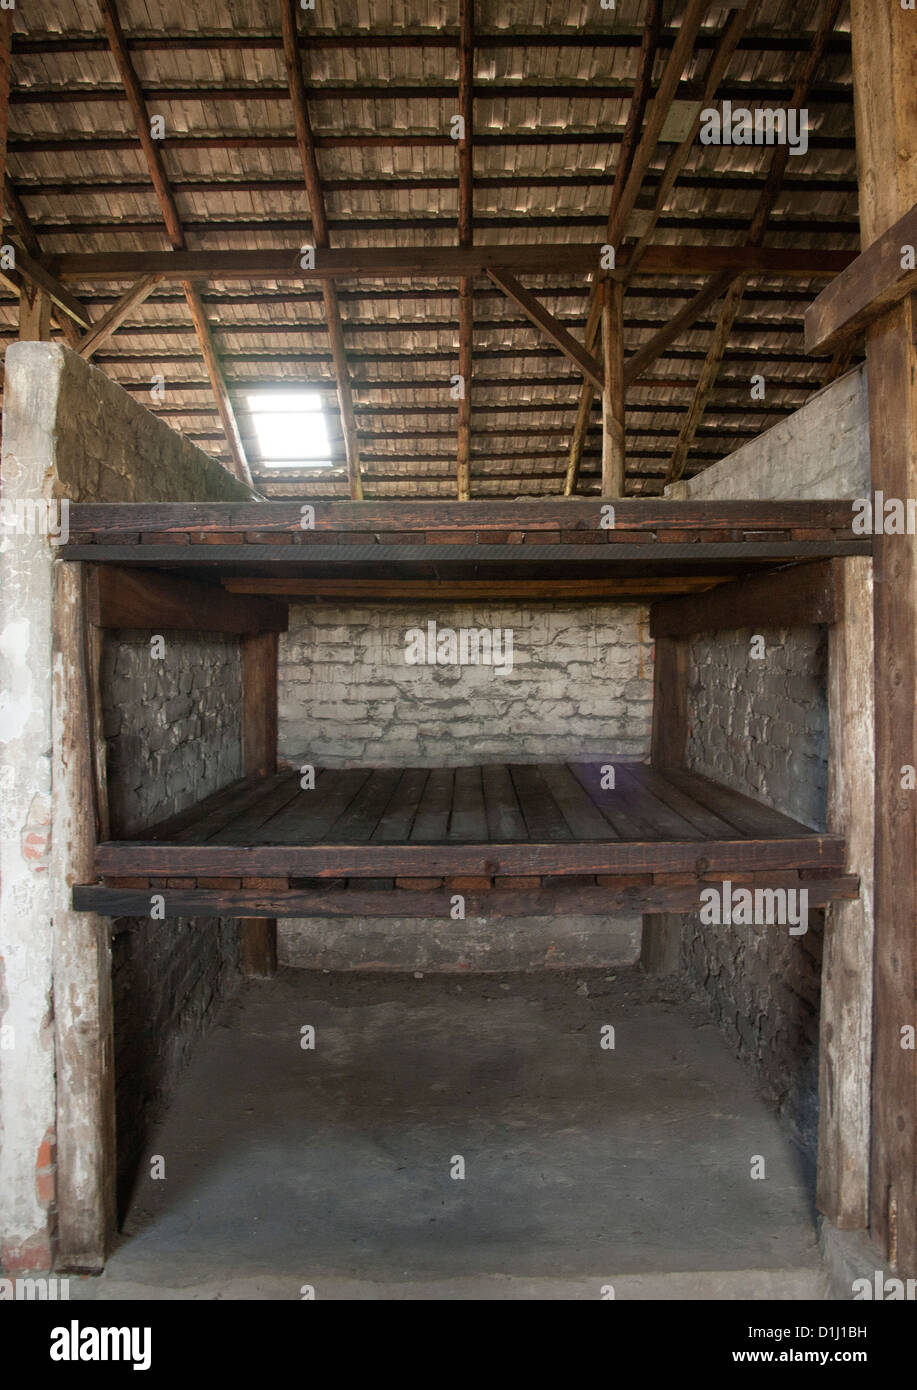 Interior of one of the barracks in the former Auschwitz II–Birkenau concentration camp in southern Poland. Stock Photo